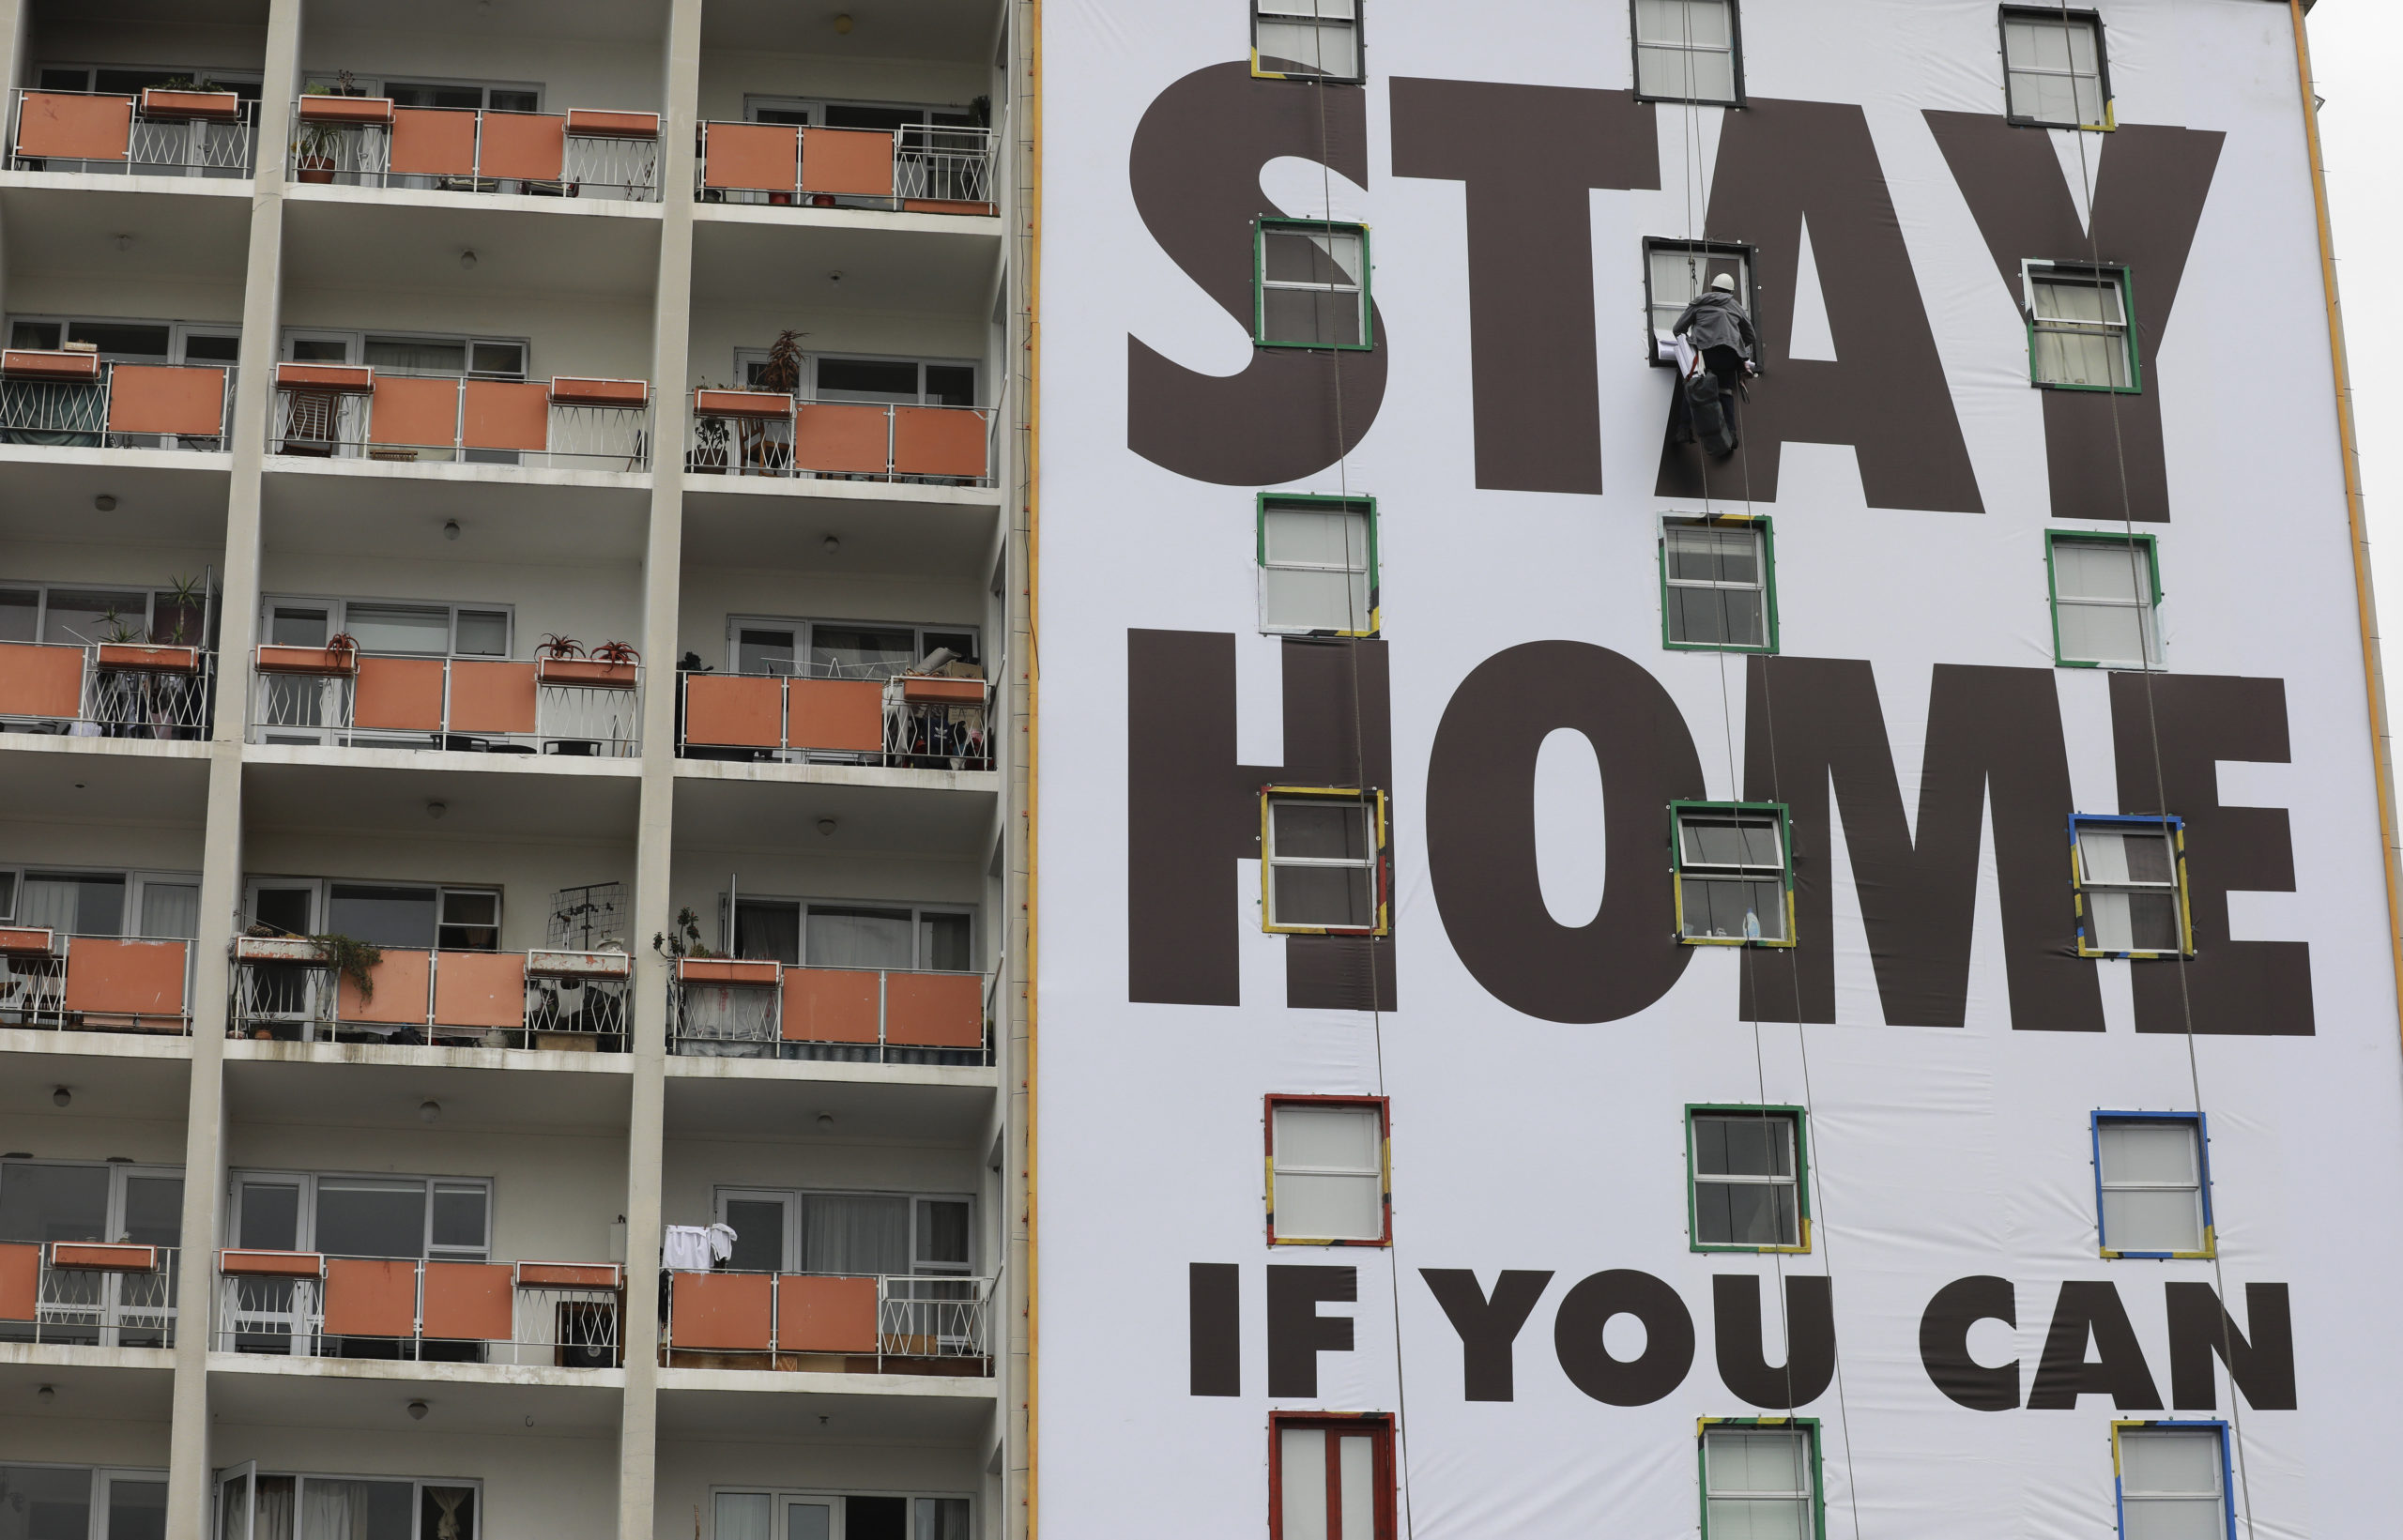 A billboard is installed on an apartment building in Cape Town, South Africa as the country went under a national lockdown due to the coronavirus pandemic